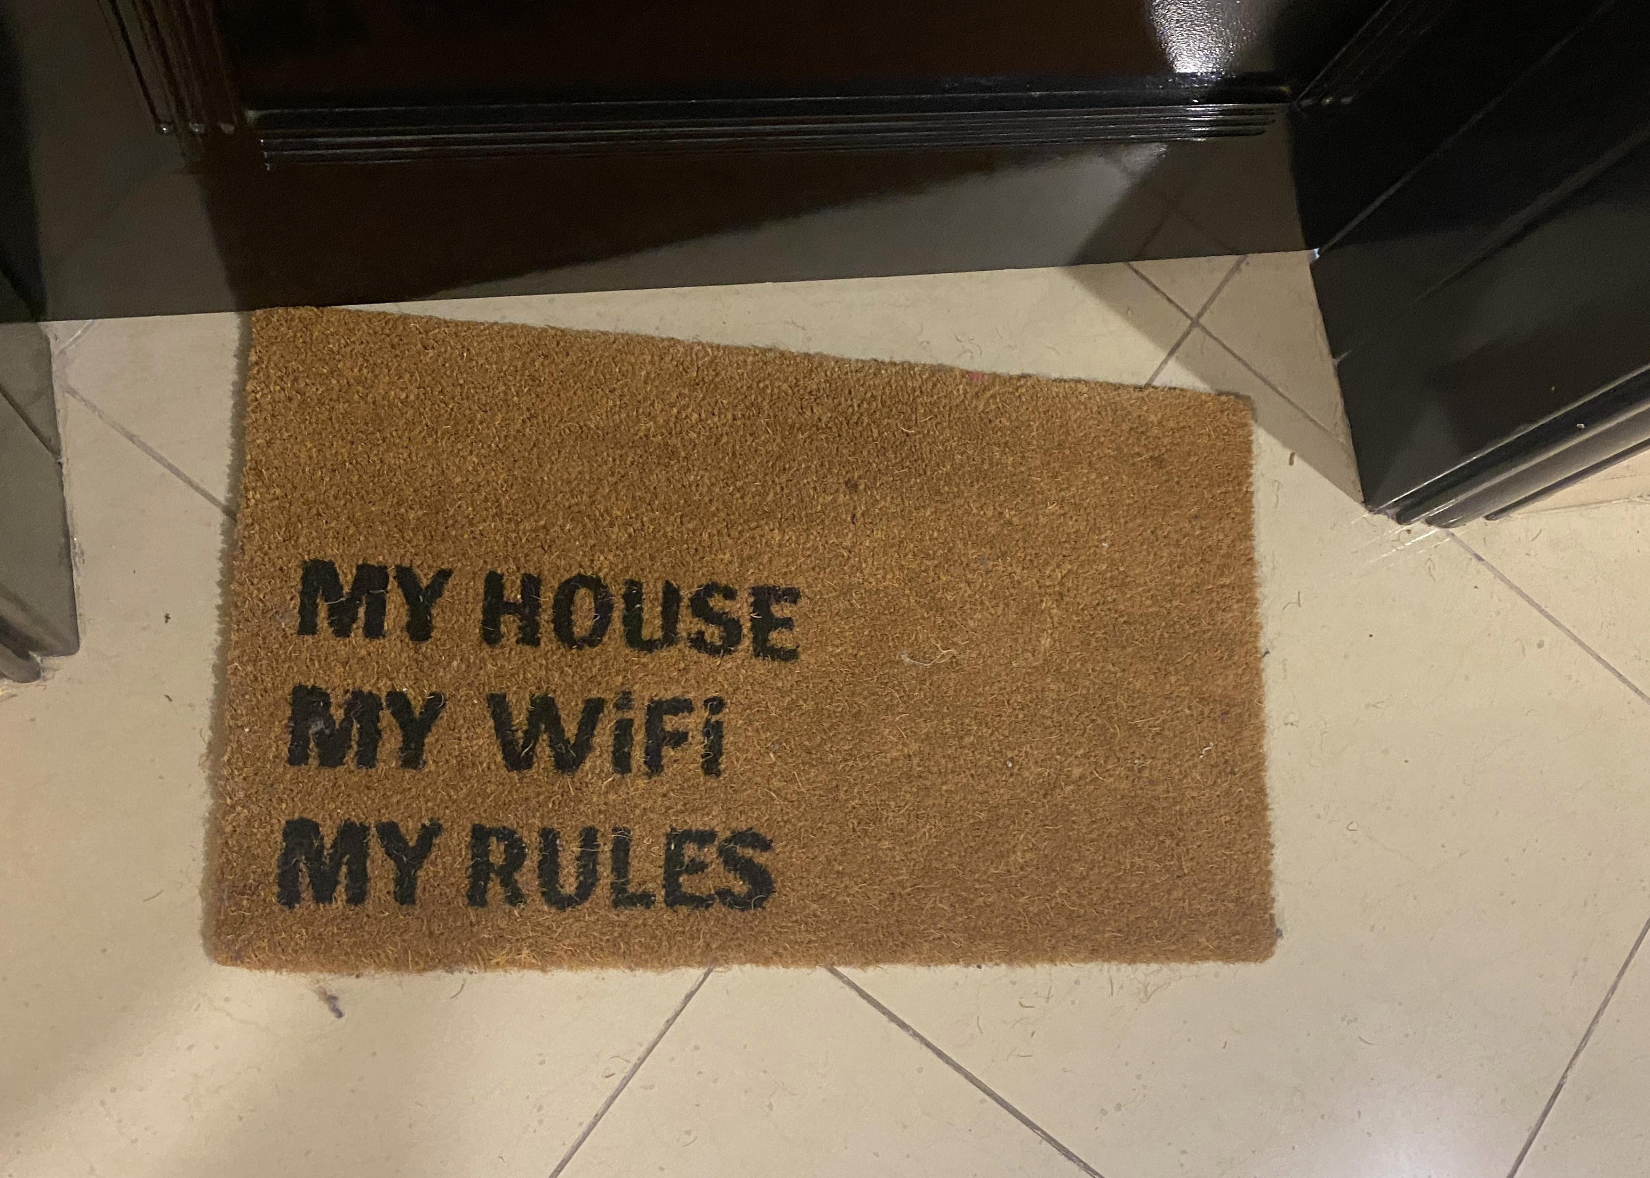 &quot;My house, my WiFi, my rules&quot;